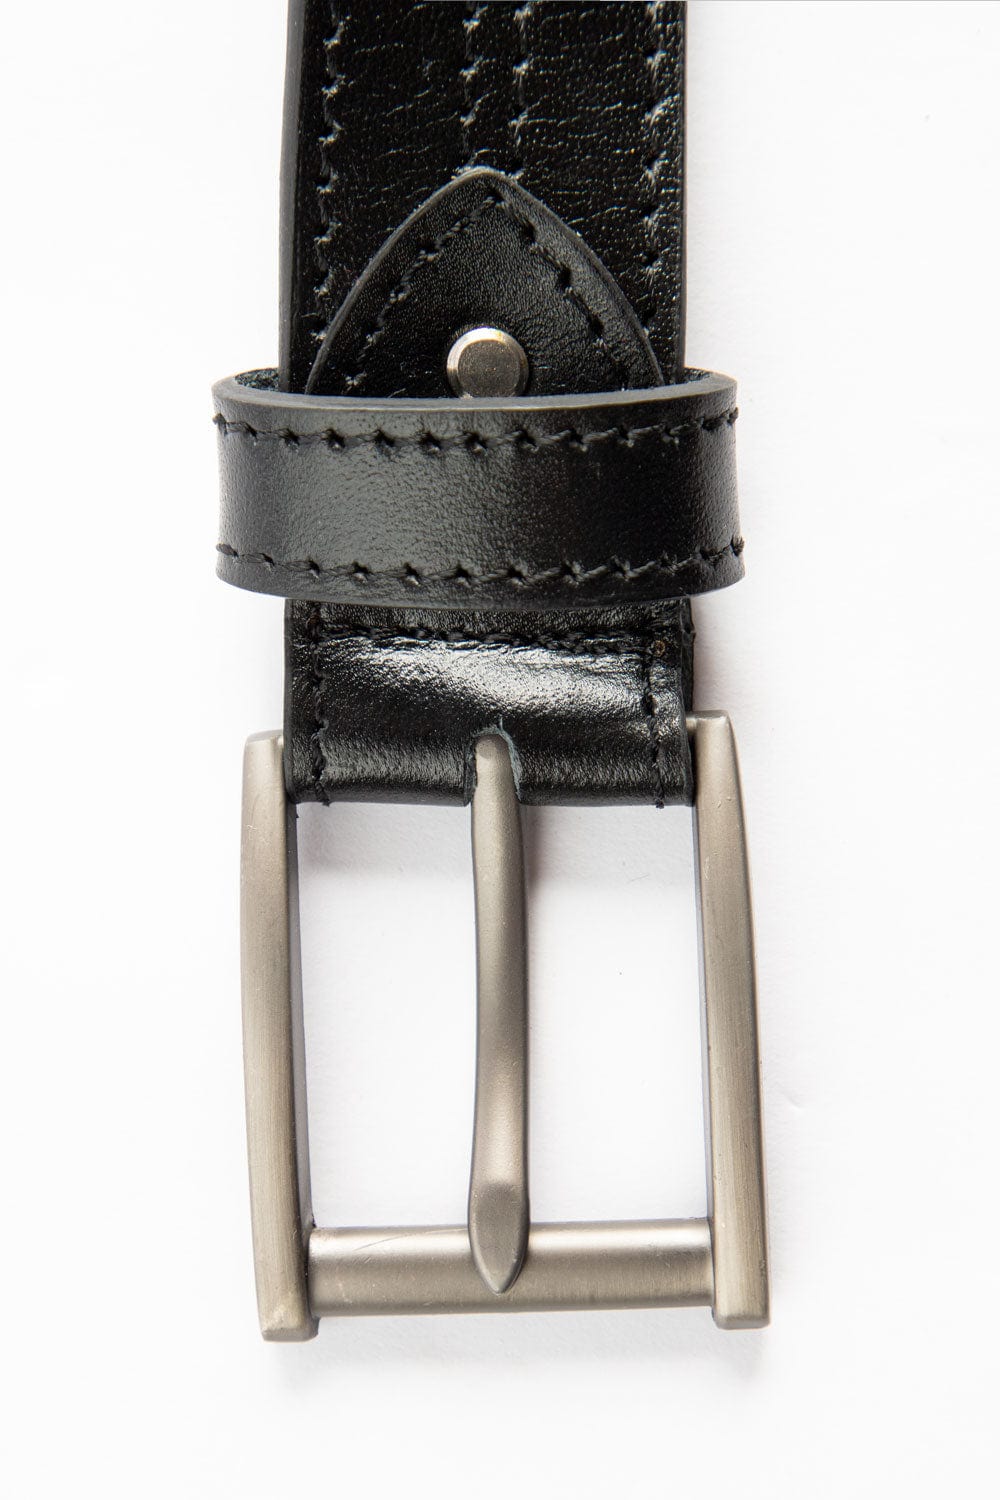 Hope Not Out by Shahid Afridi Men Belts Classic Black Leather Belt With Double Stitch HMBLT210001